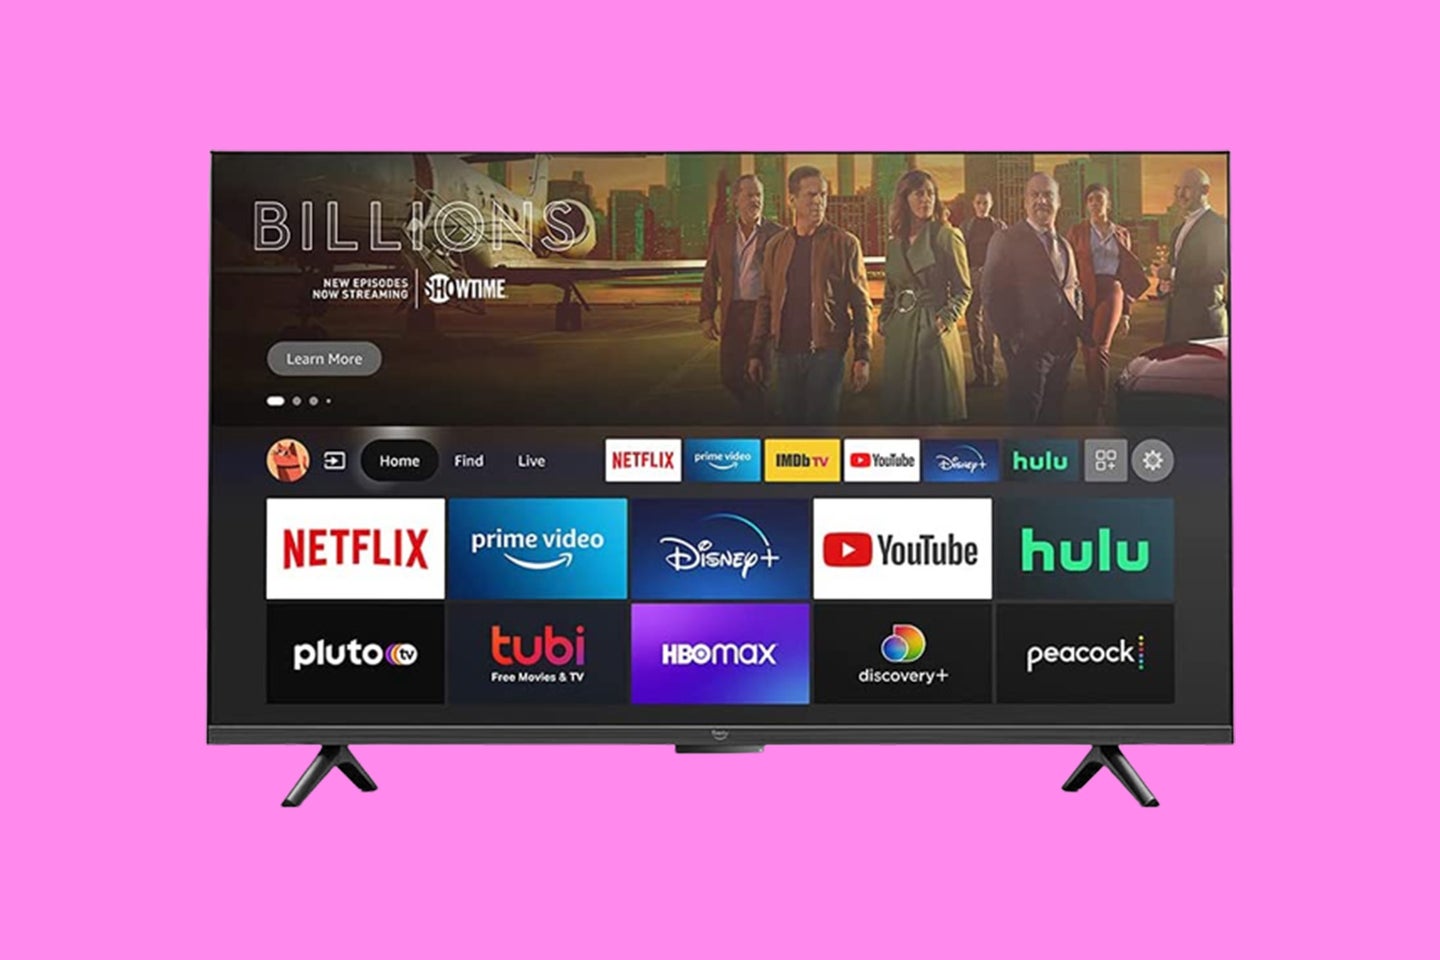 An image of a smart TV on a bright pink background